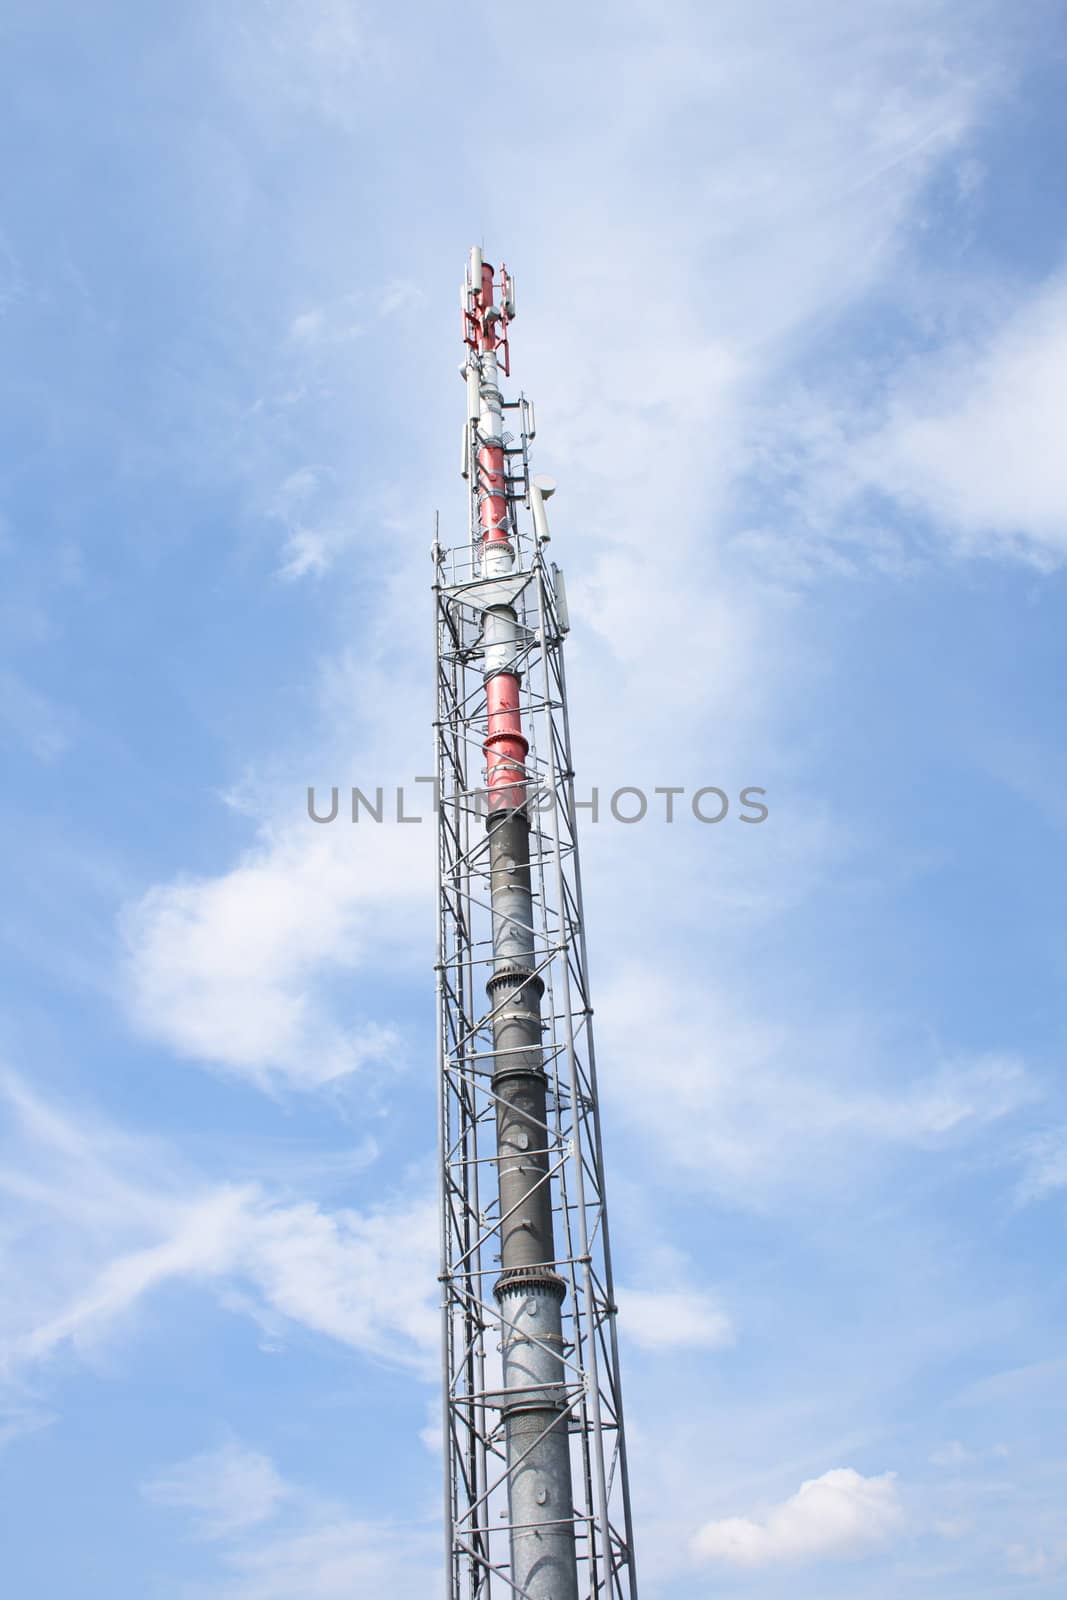 gsm tower on the blue sky background